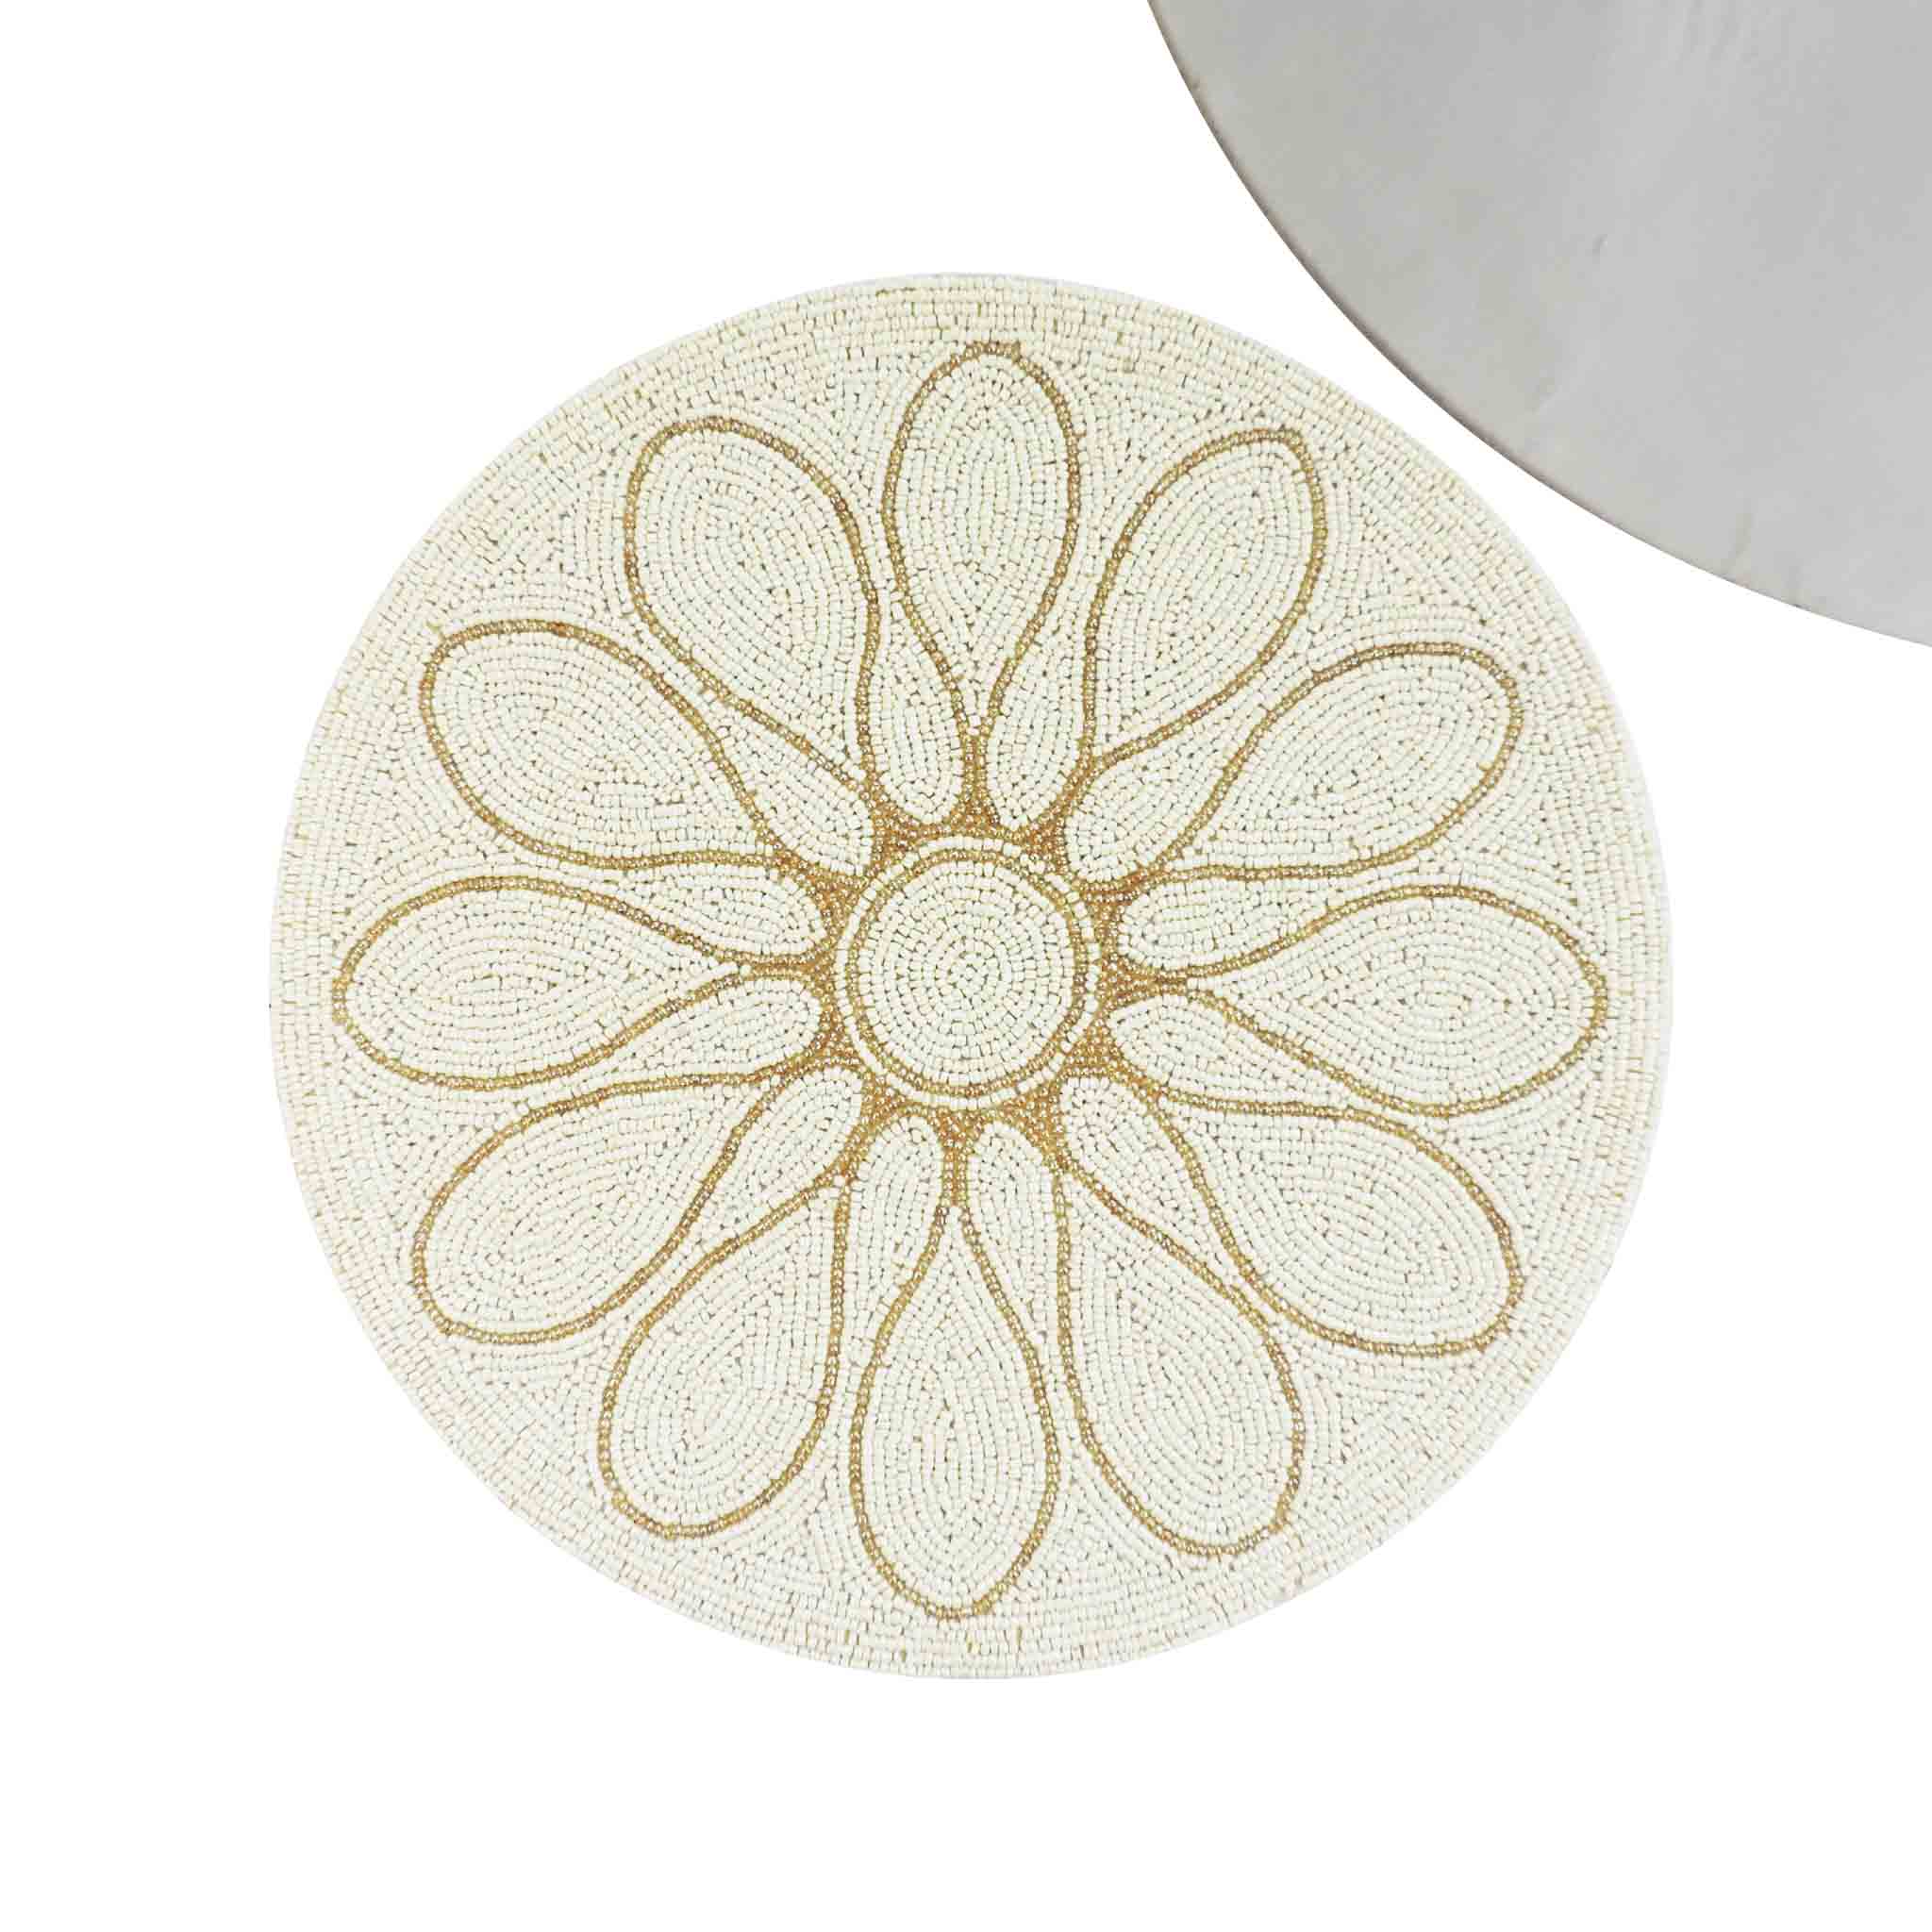 Petal Impressions Bead Embroidered Placemat in Cream, Set of 2